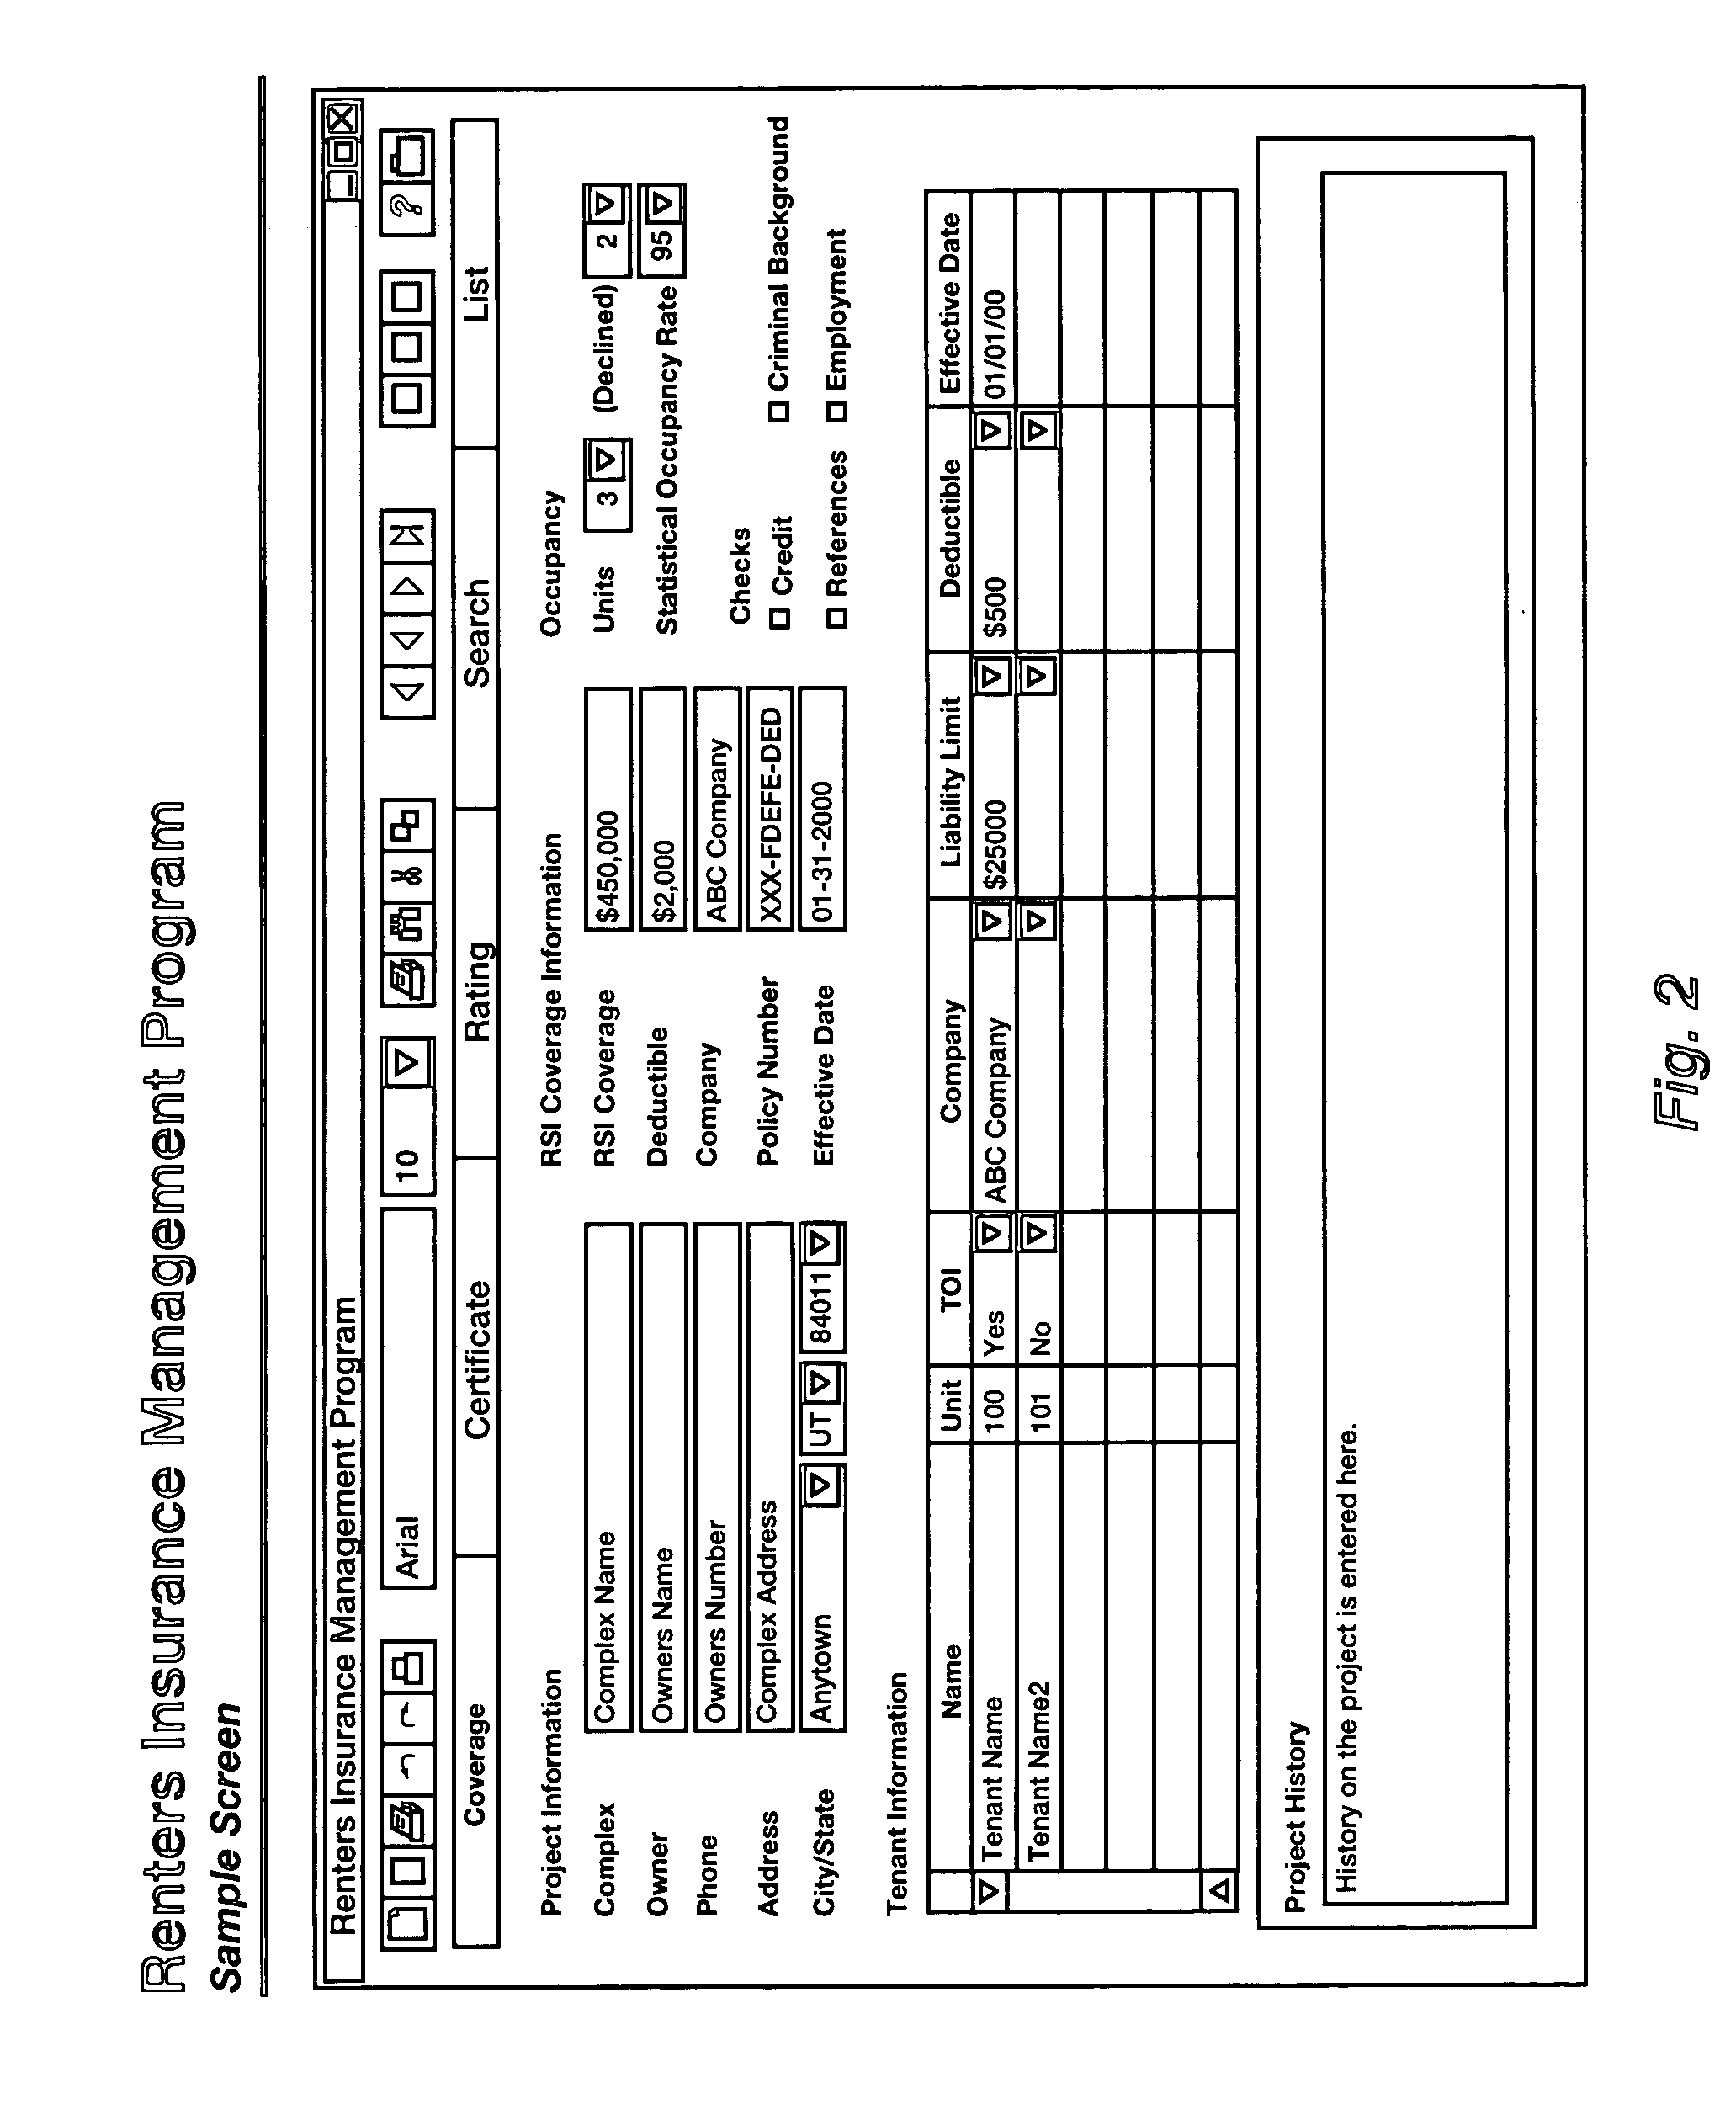 Method and apparatus for insuring multiple unit dwellings